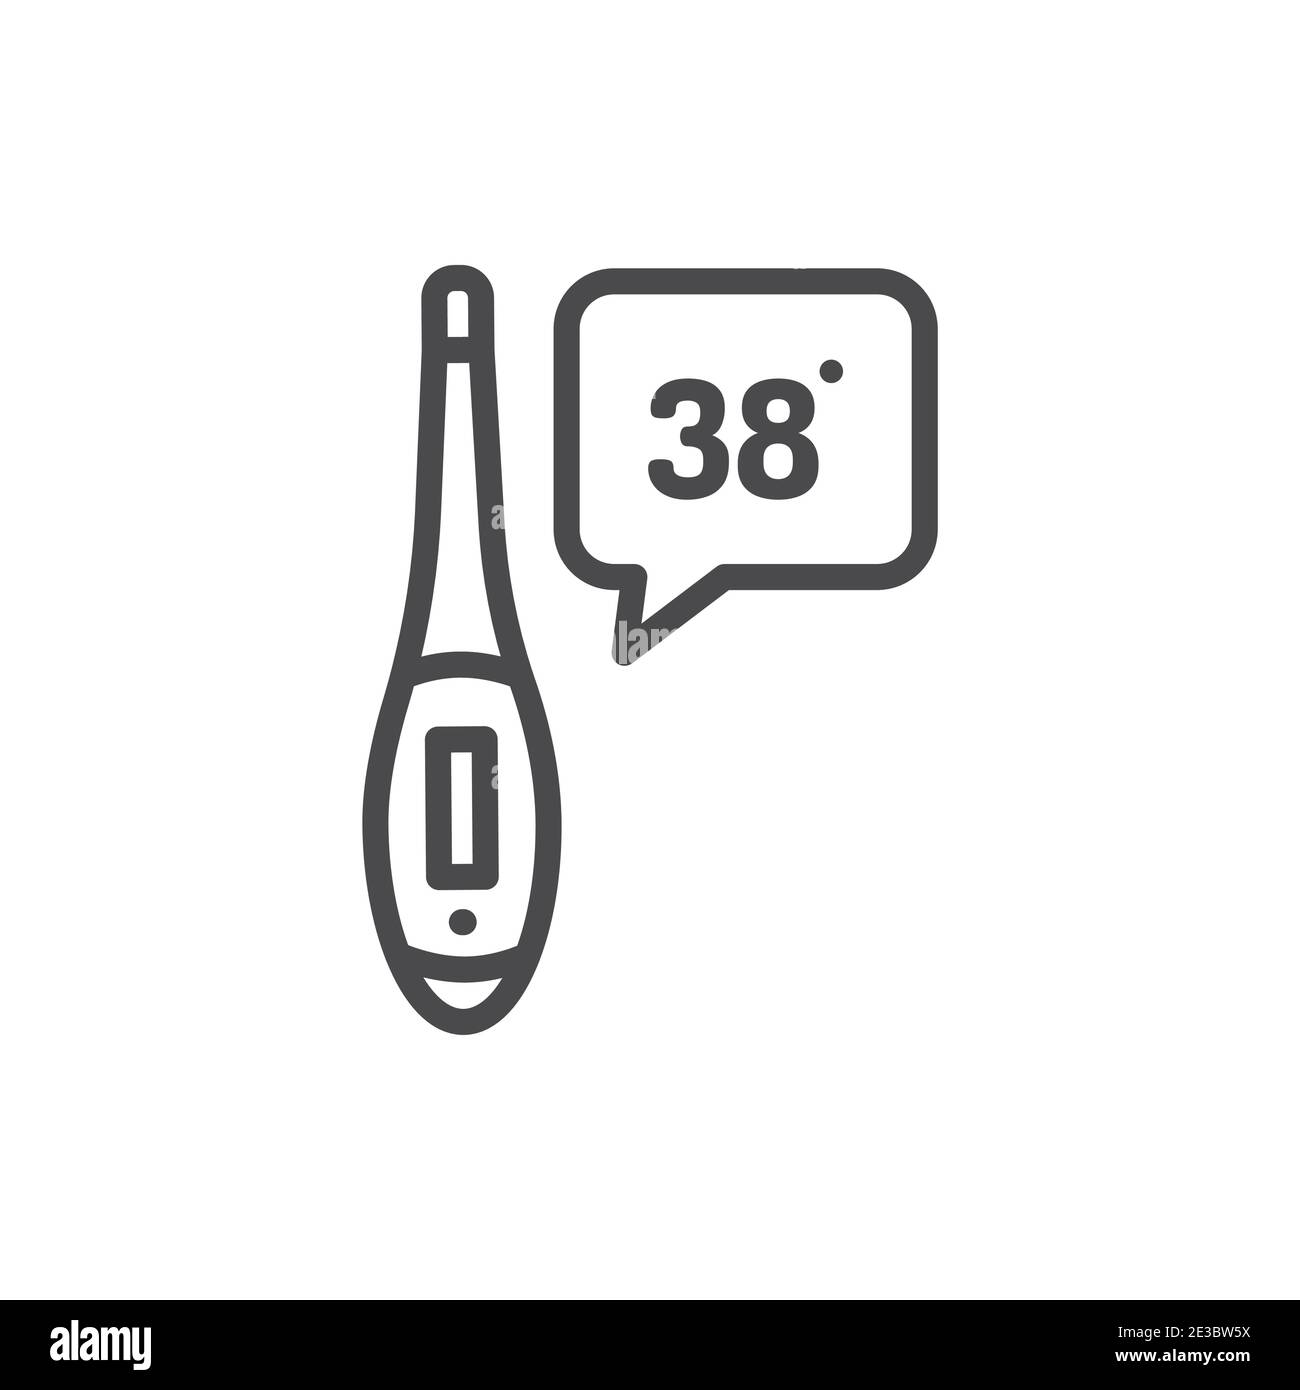 Thermometer measures temperature black line icon. Isolated vector element. Outline pictogram for web page, mobile app, promo. Stock Vector